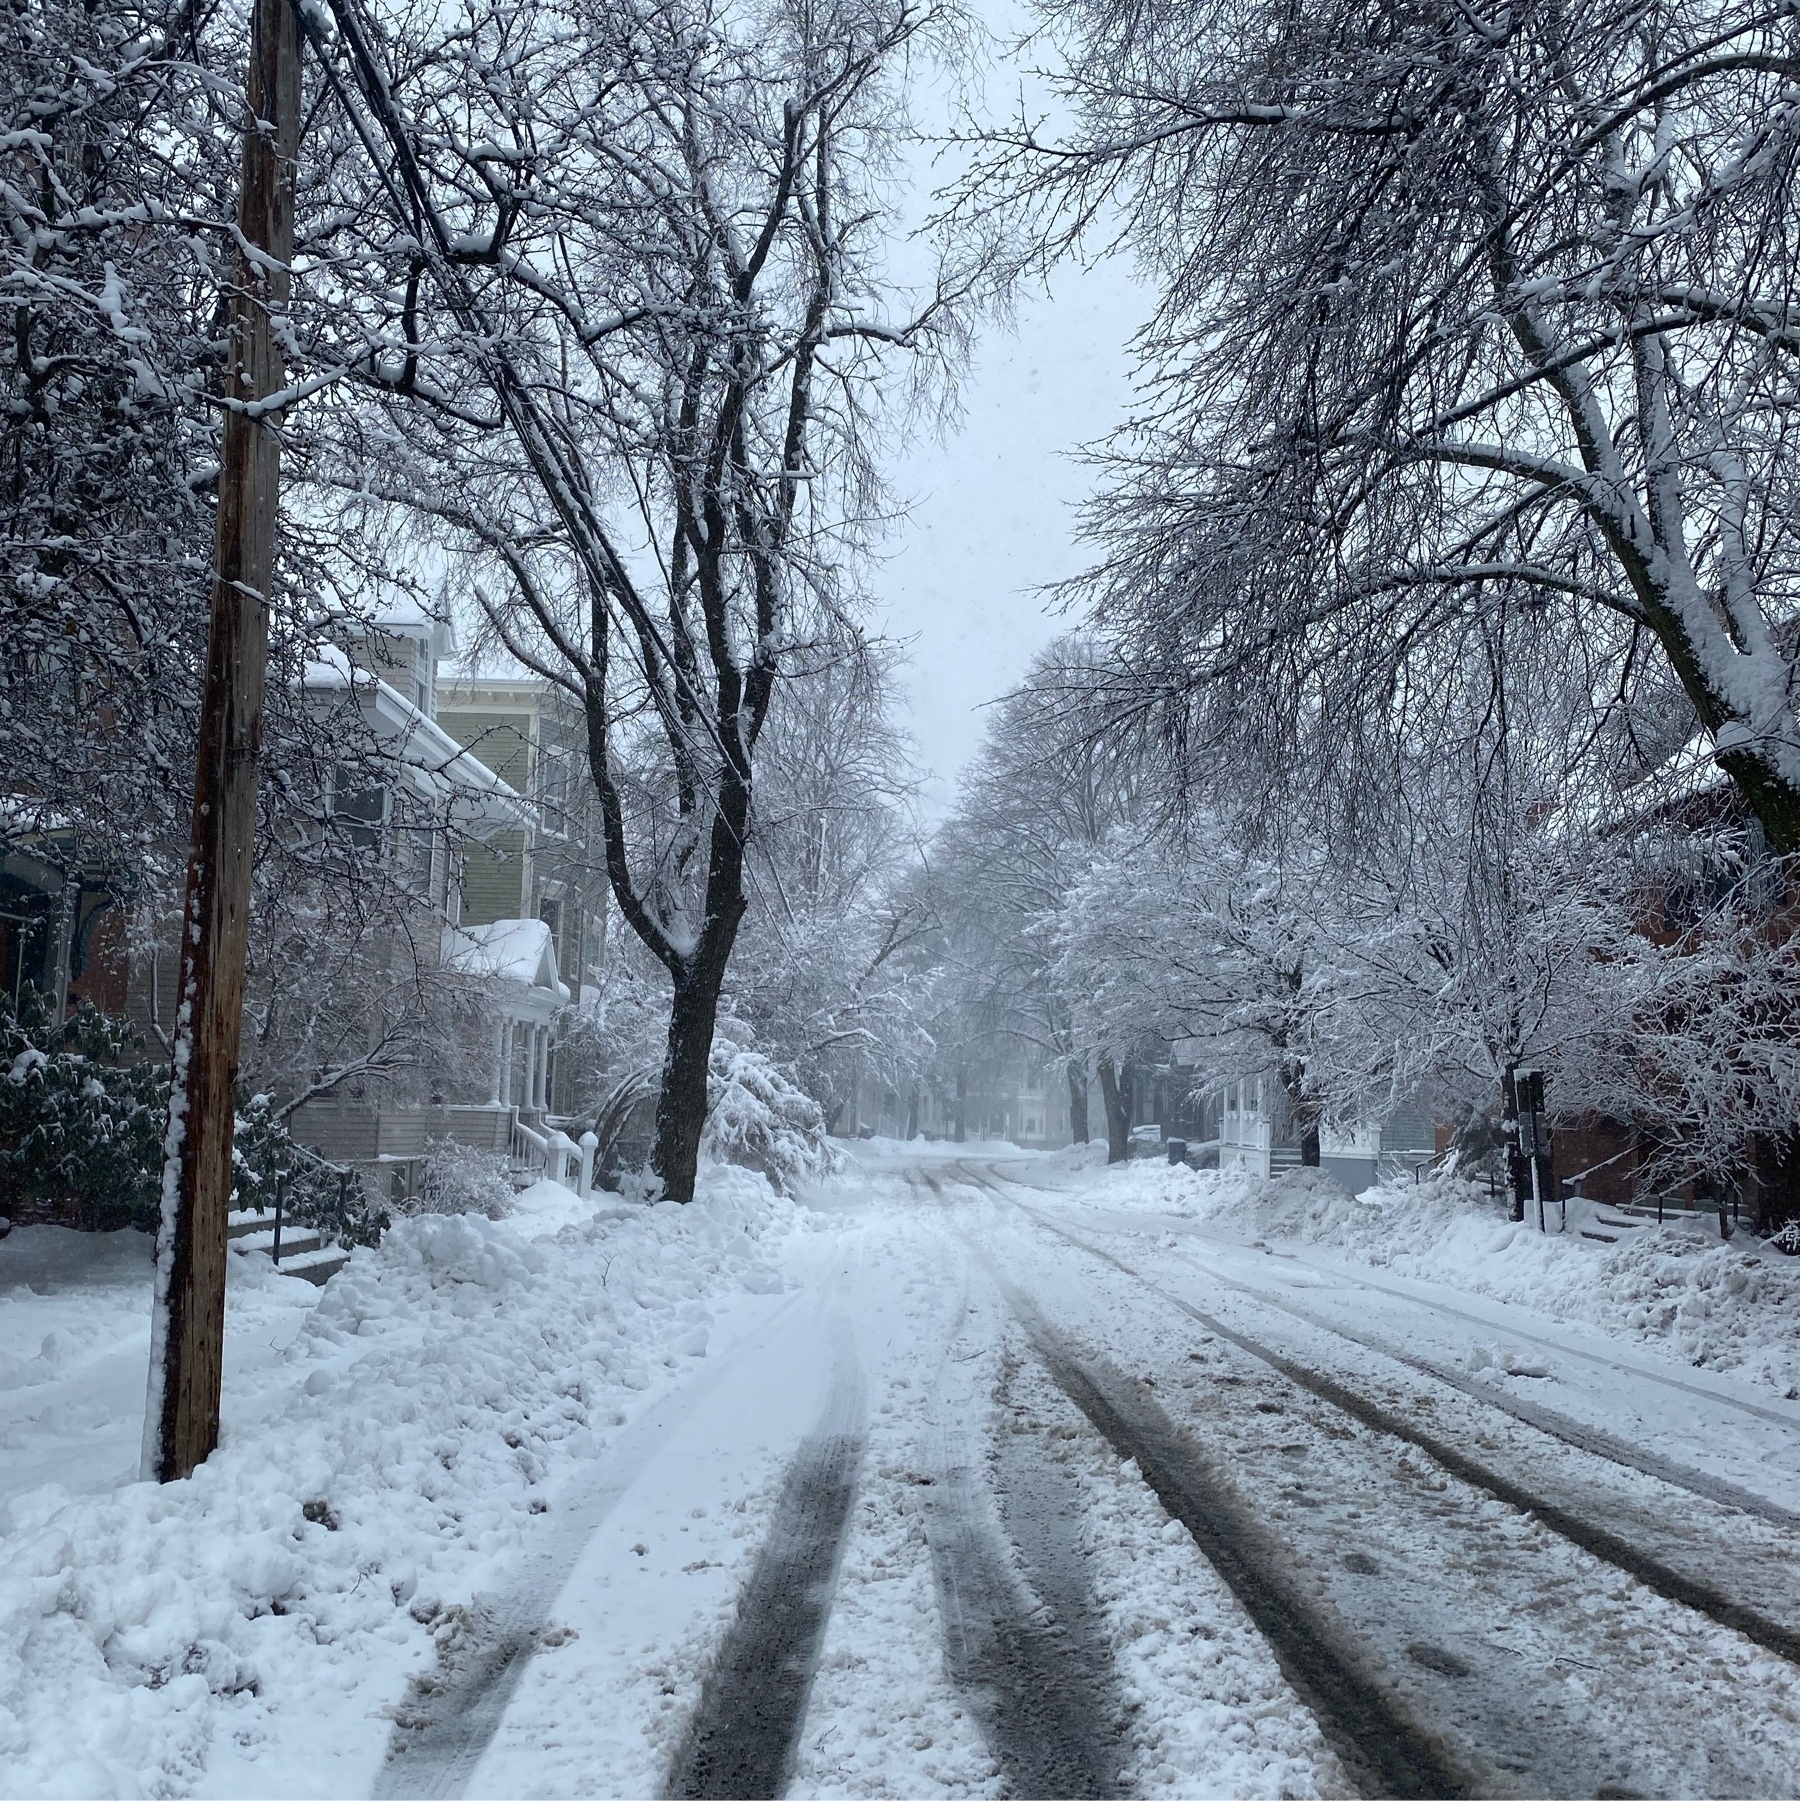 Snow covered street with bare trees and utility poles coated in snow on either side.